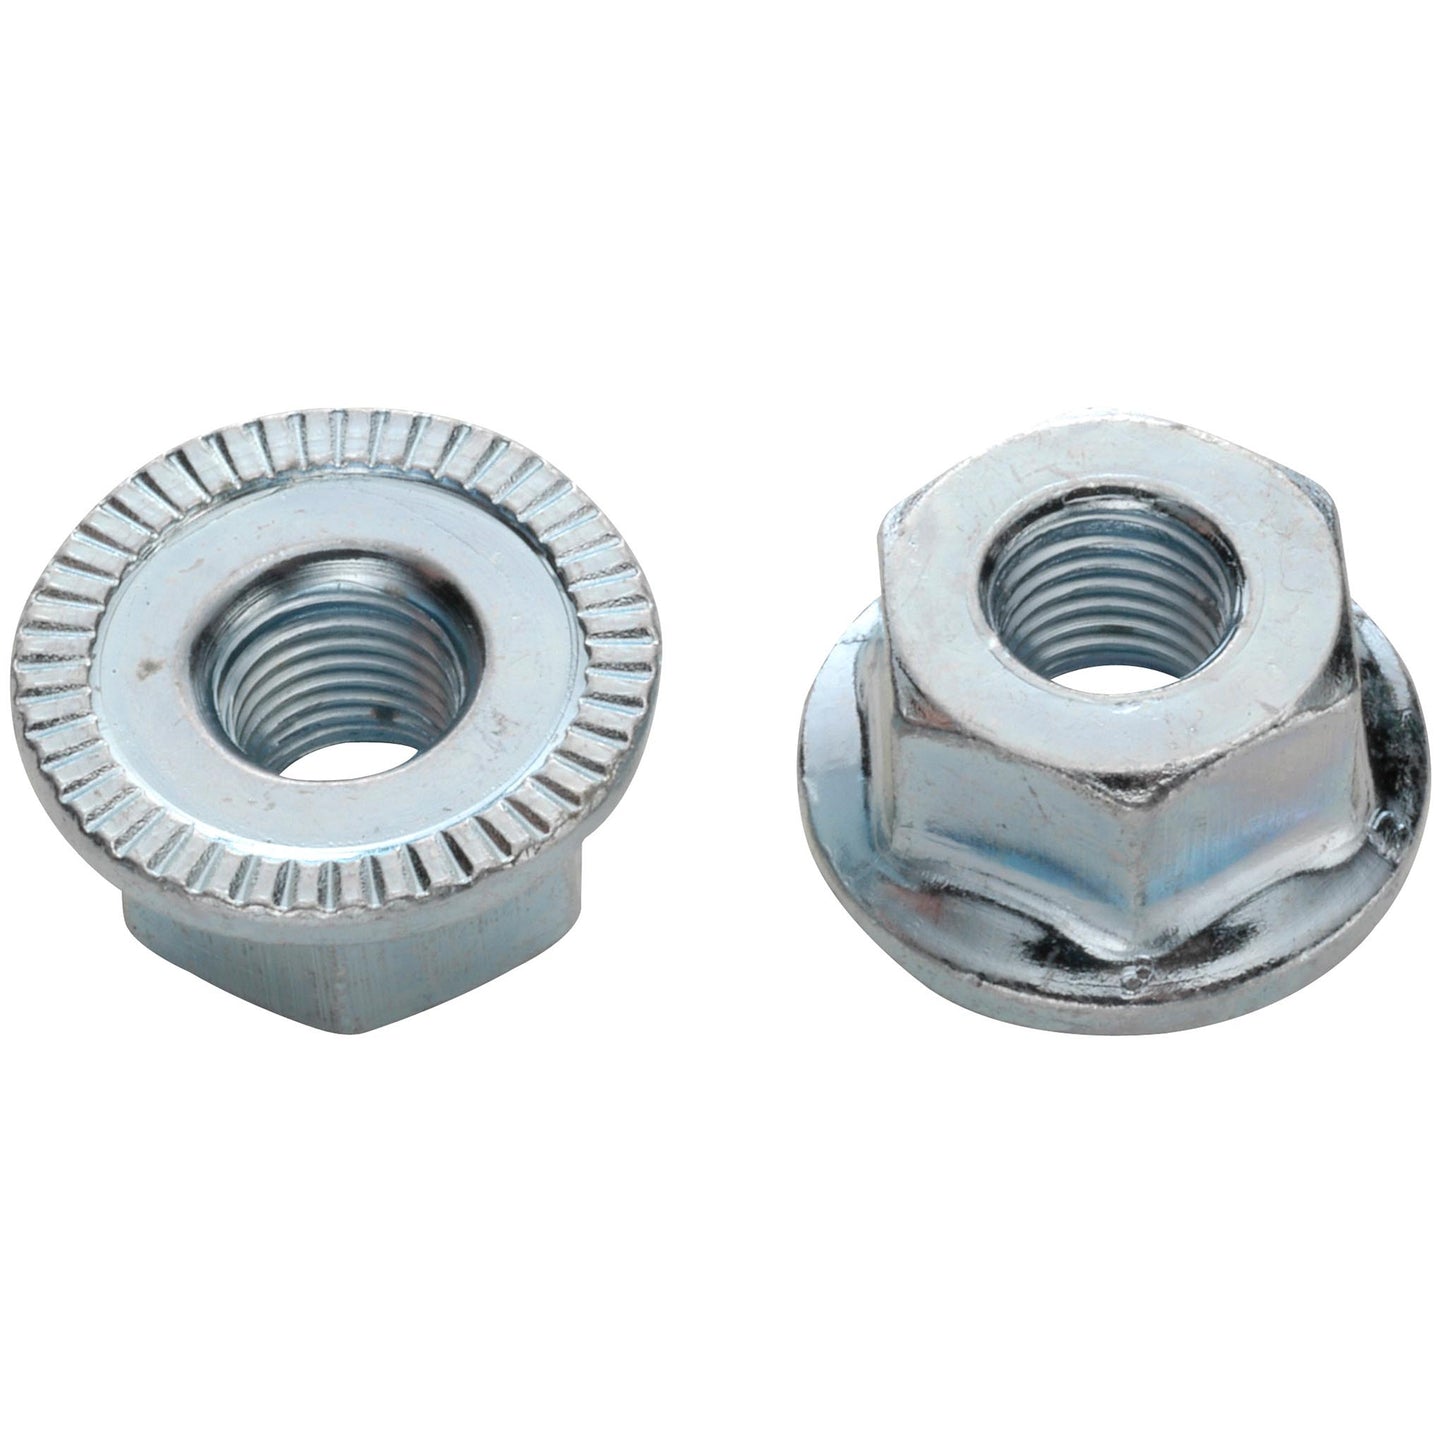 Flange nuts for circuits FG 9.5 galvanized steel